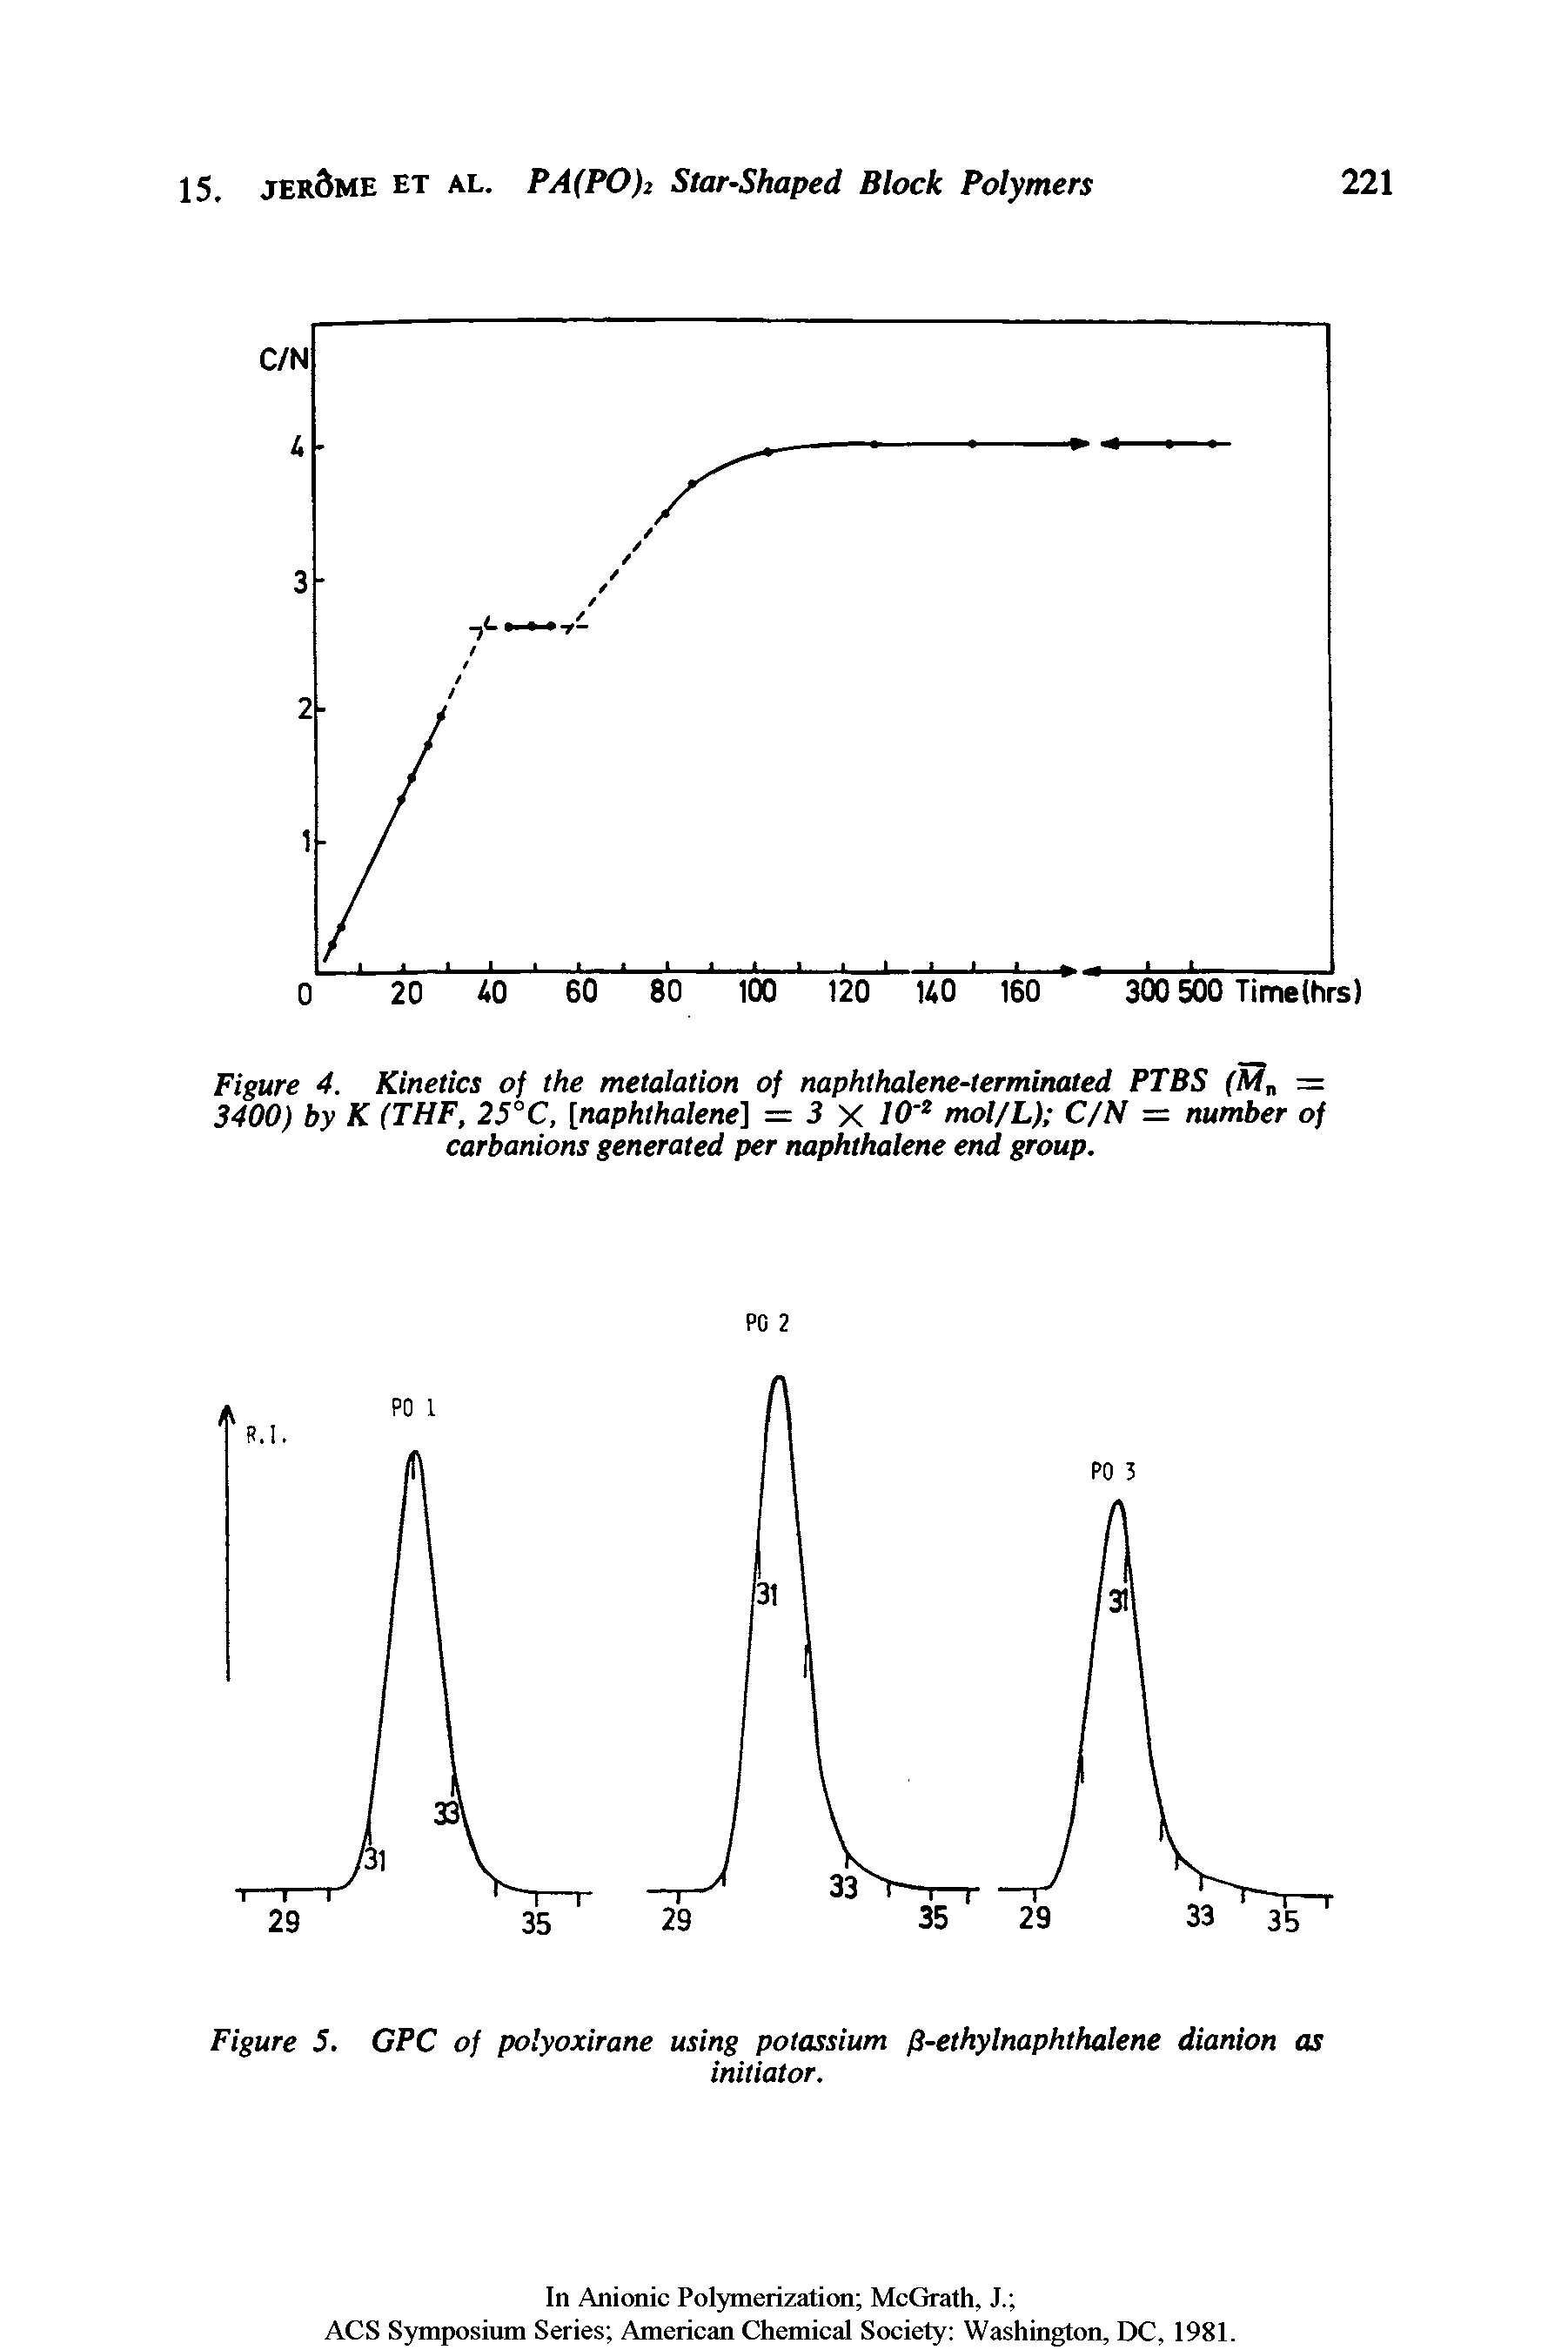 Figure 4. Kinetics of the metalation of naphthalene-terminated PTBS ( = 3400) by (THF, 25°C, [naphthalene] = 3 X I O 2 mol/L) C/N = number of carbanions generated per naphthalene end group.